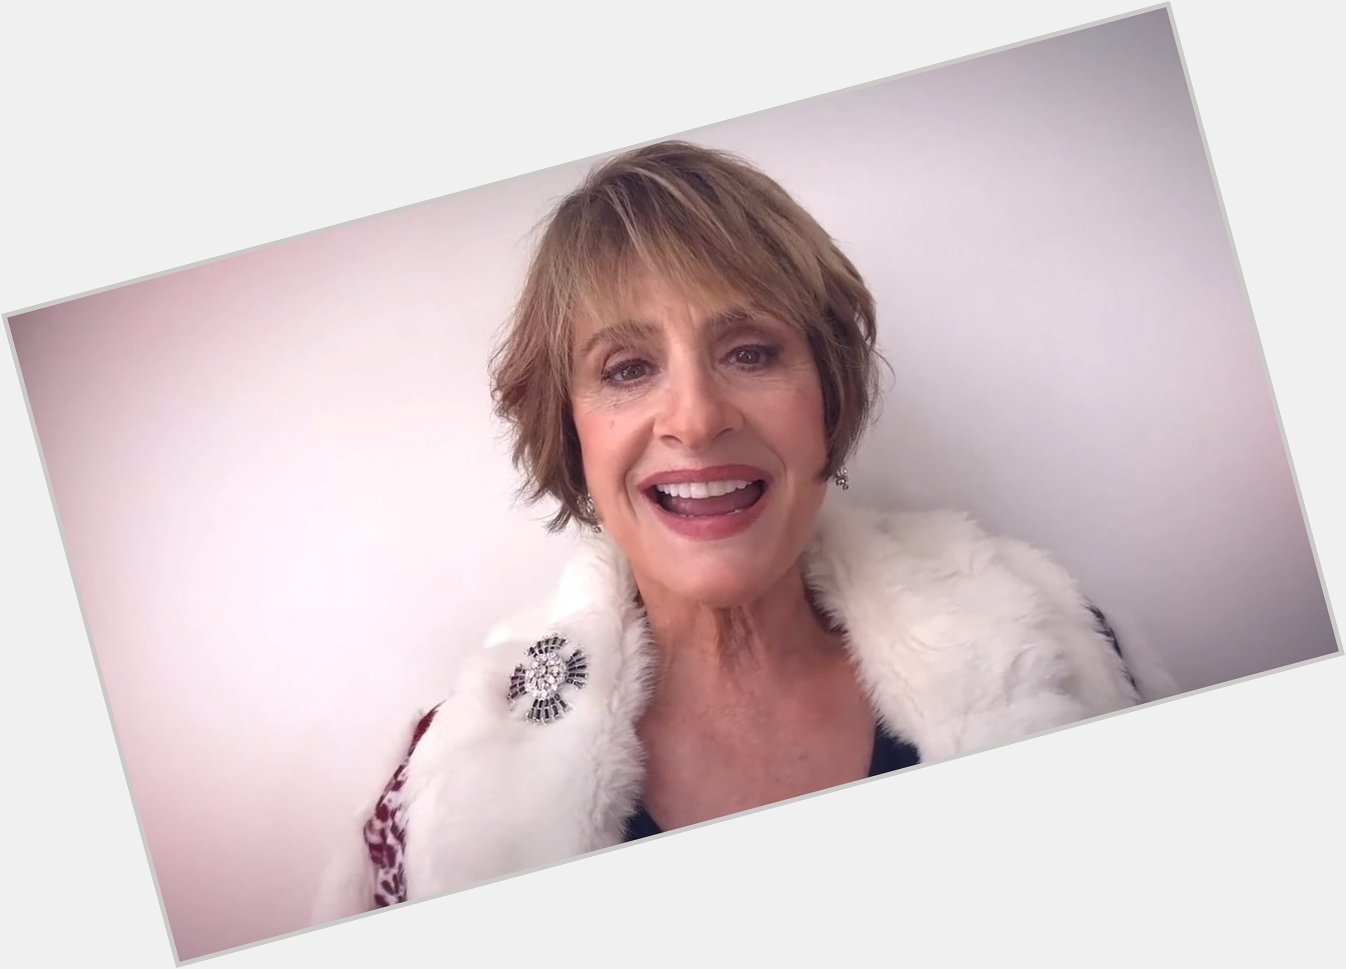 I am late but Happy belated birthday to the one and only Patti Lupone !!! Force of nature !!! All the love to her !! 